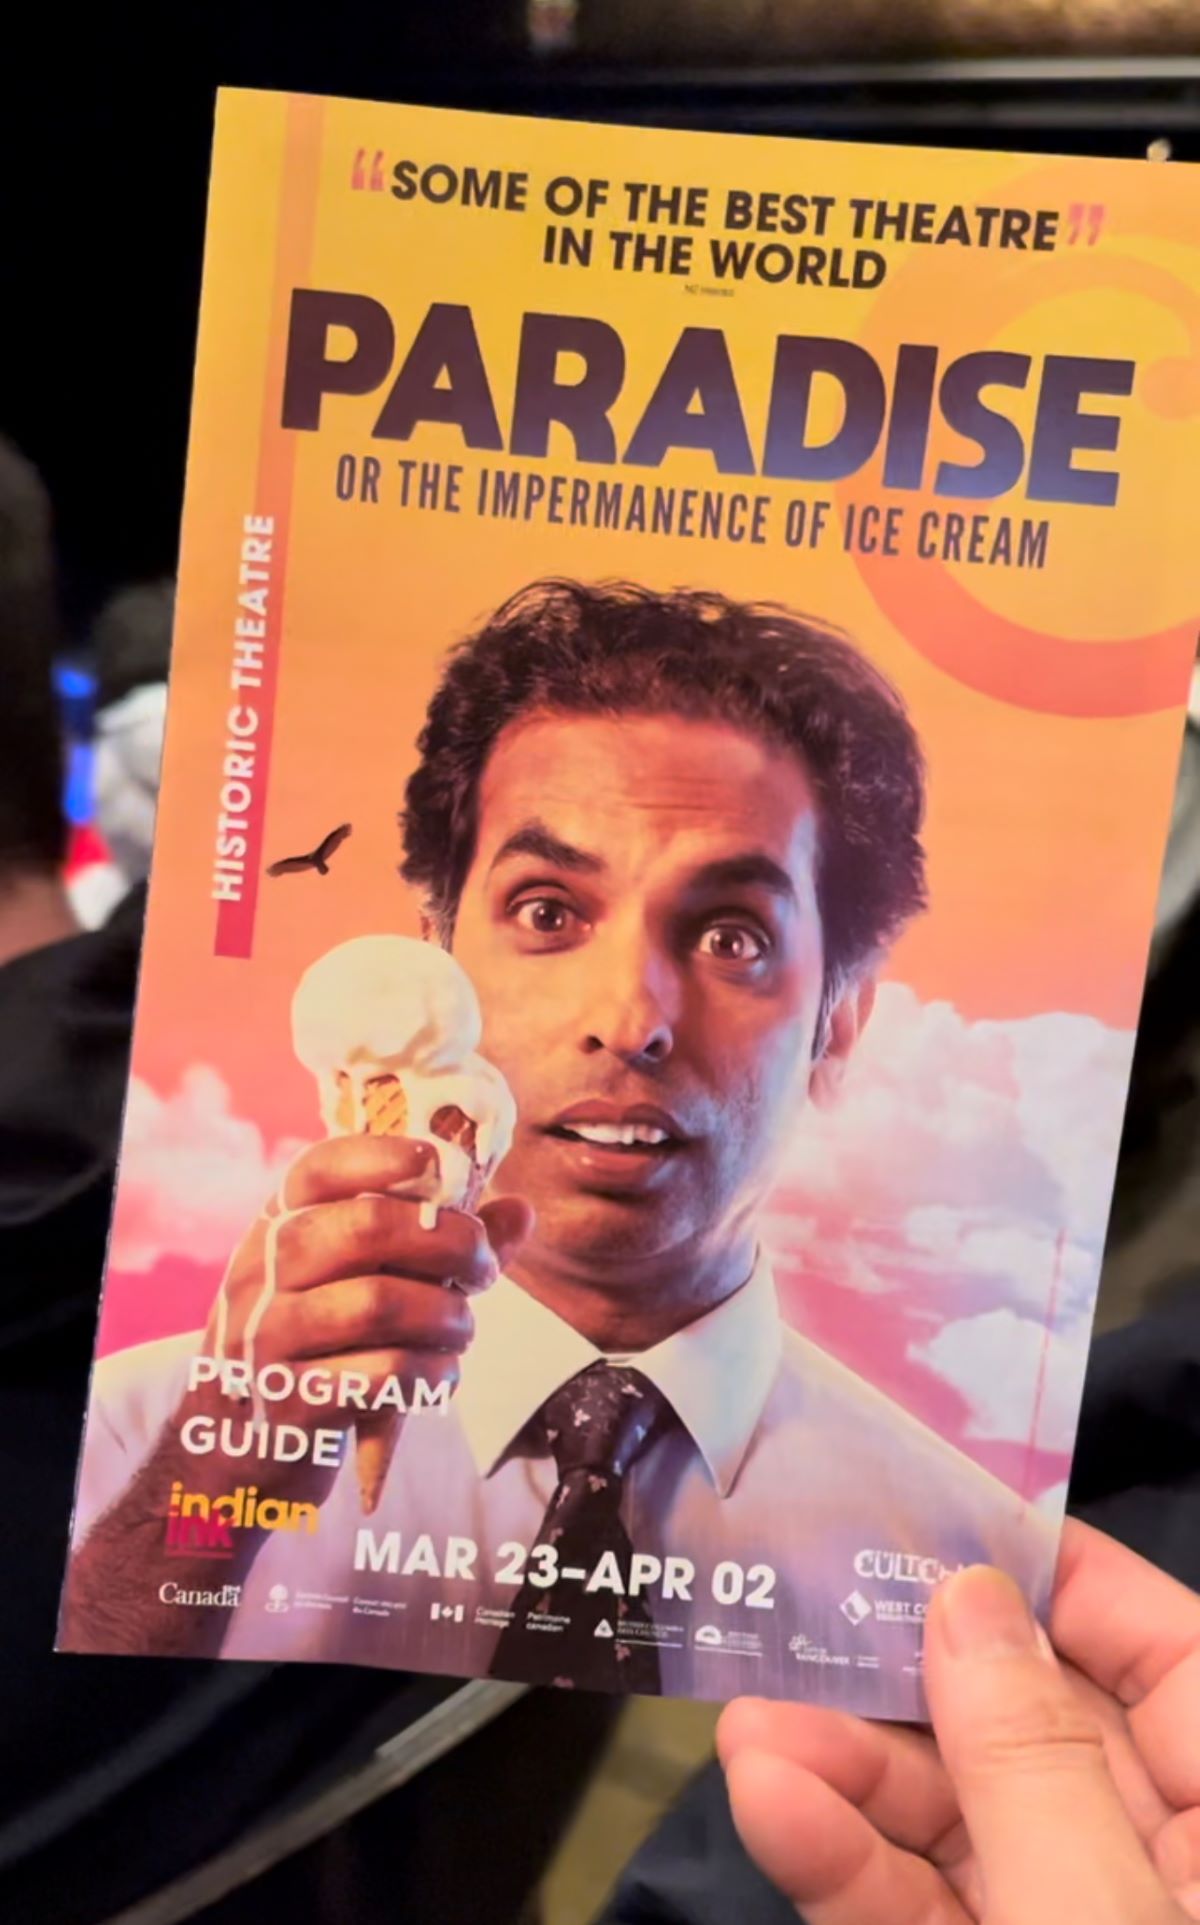 Someone holds a Paradise programme from The Cultch in Canada. It shows Actor Jacob Rajan holds a melting ice cream with the title of the play